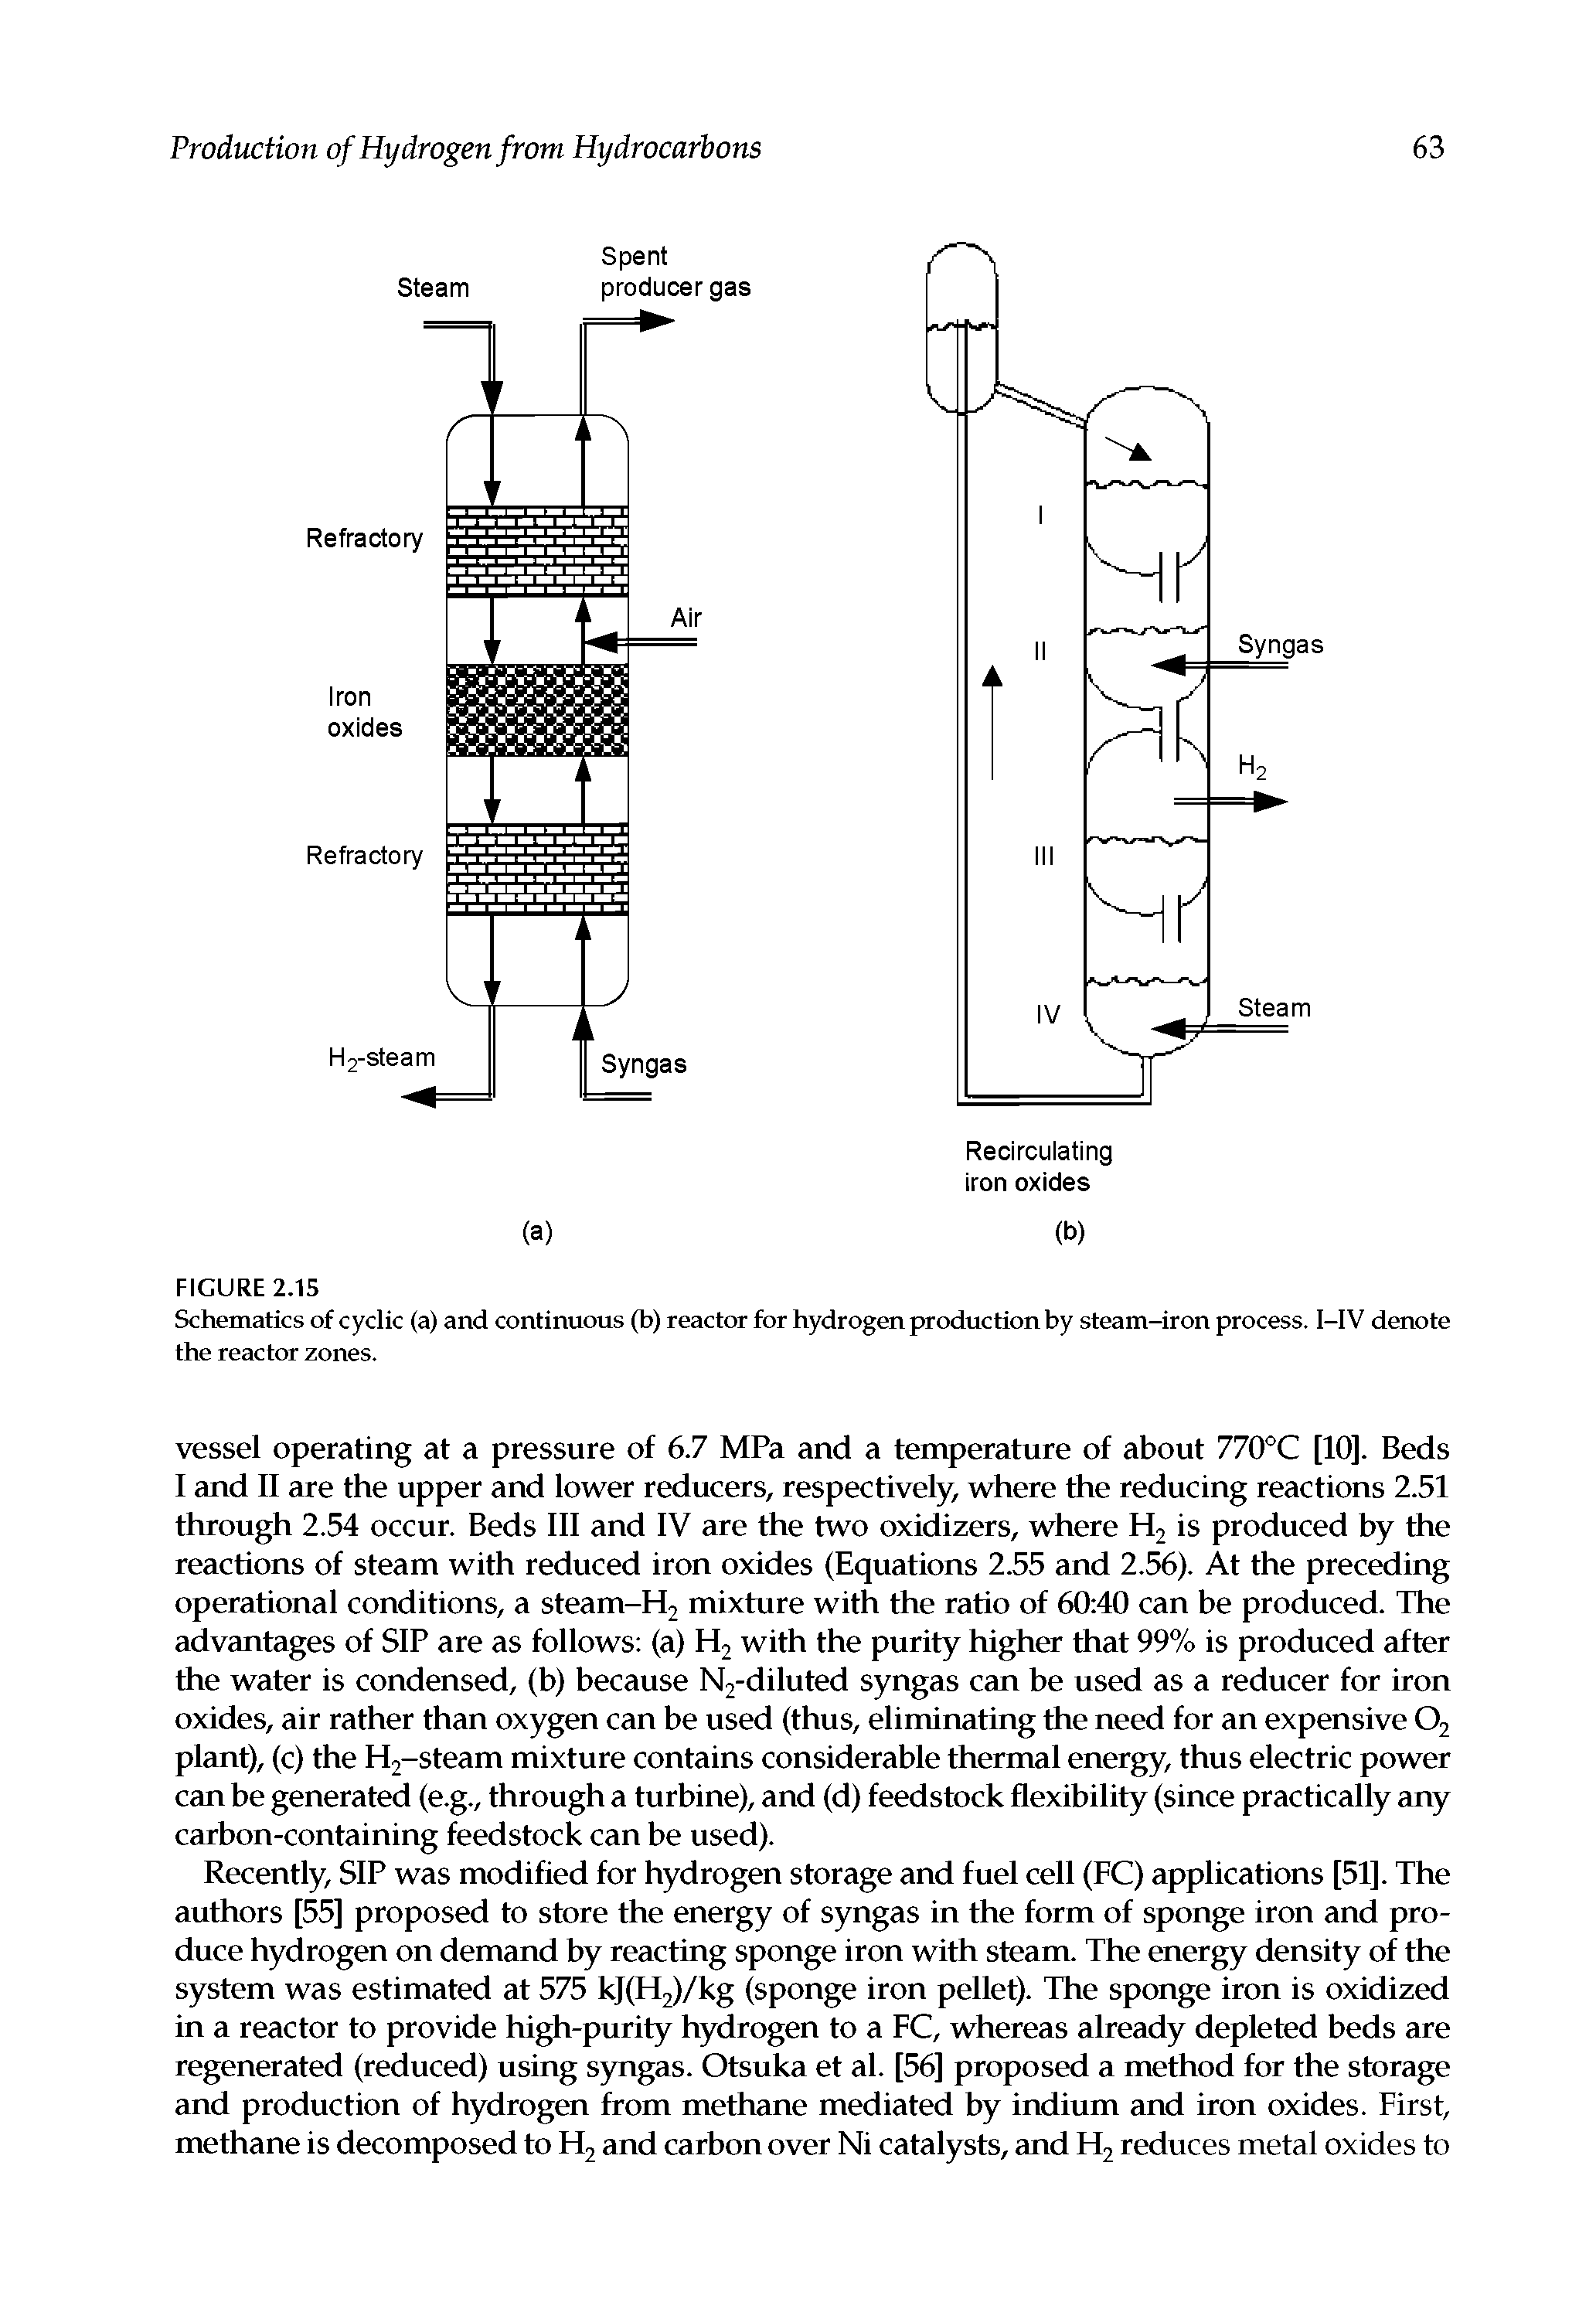 Schematics of cyclic (a) and continuous (b) reactor for hydrogen production by steam-iron process. I—IV denote the reactor zones.